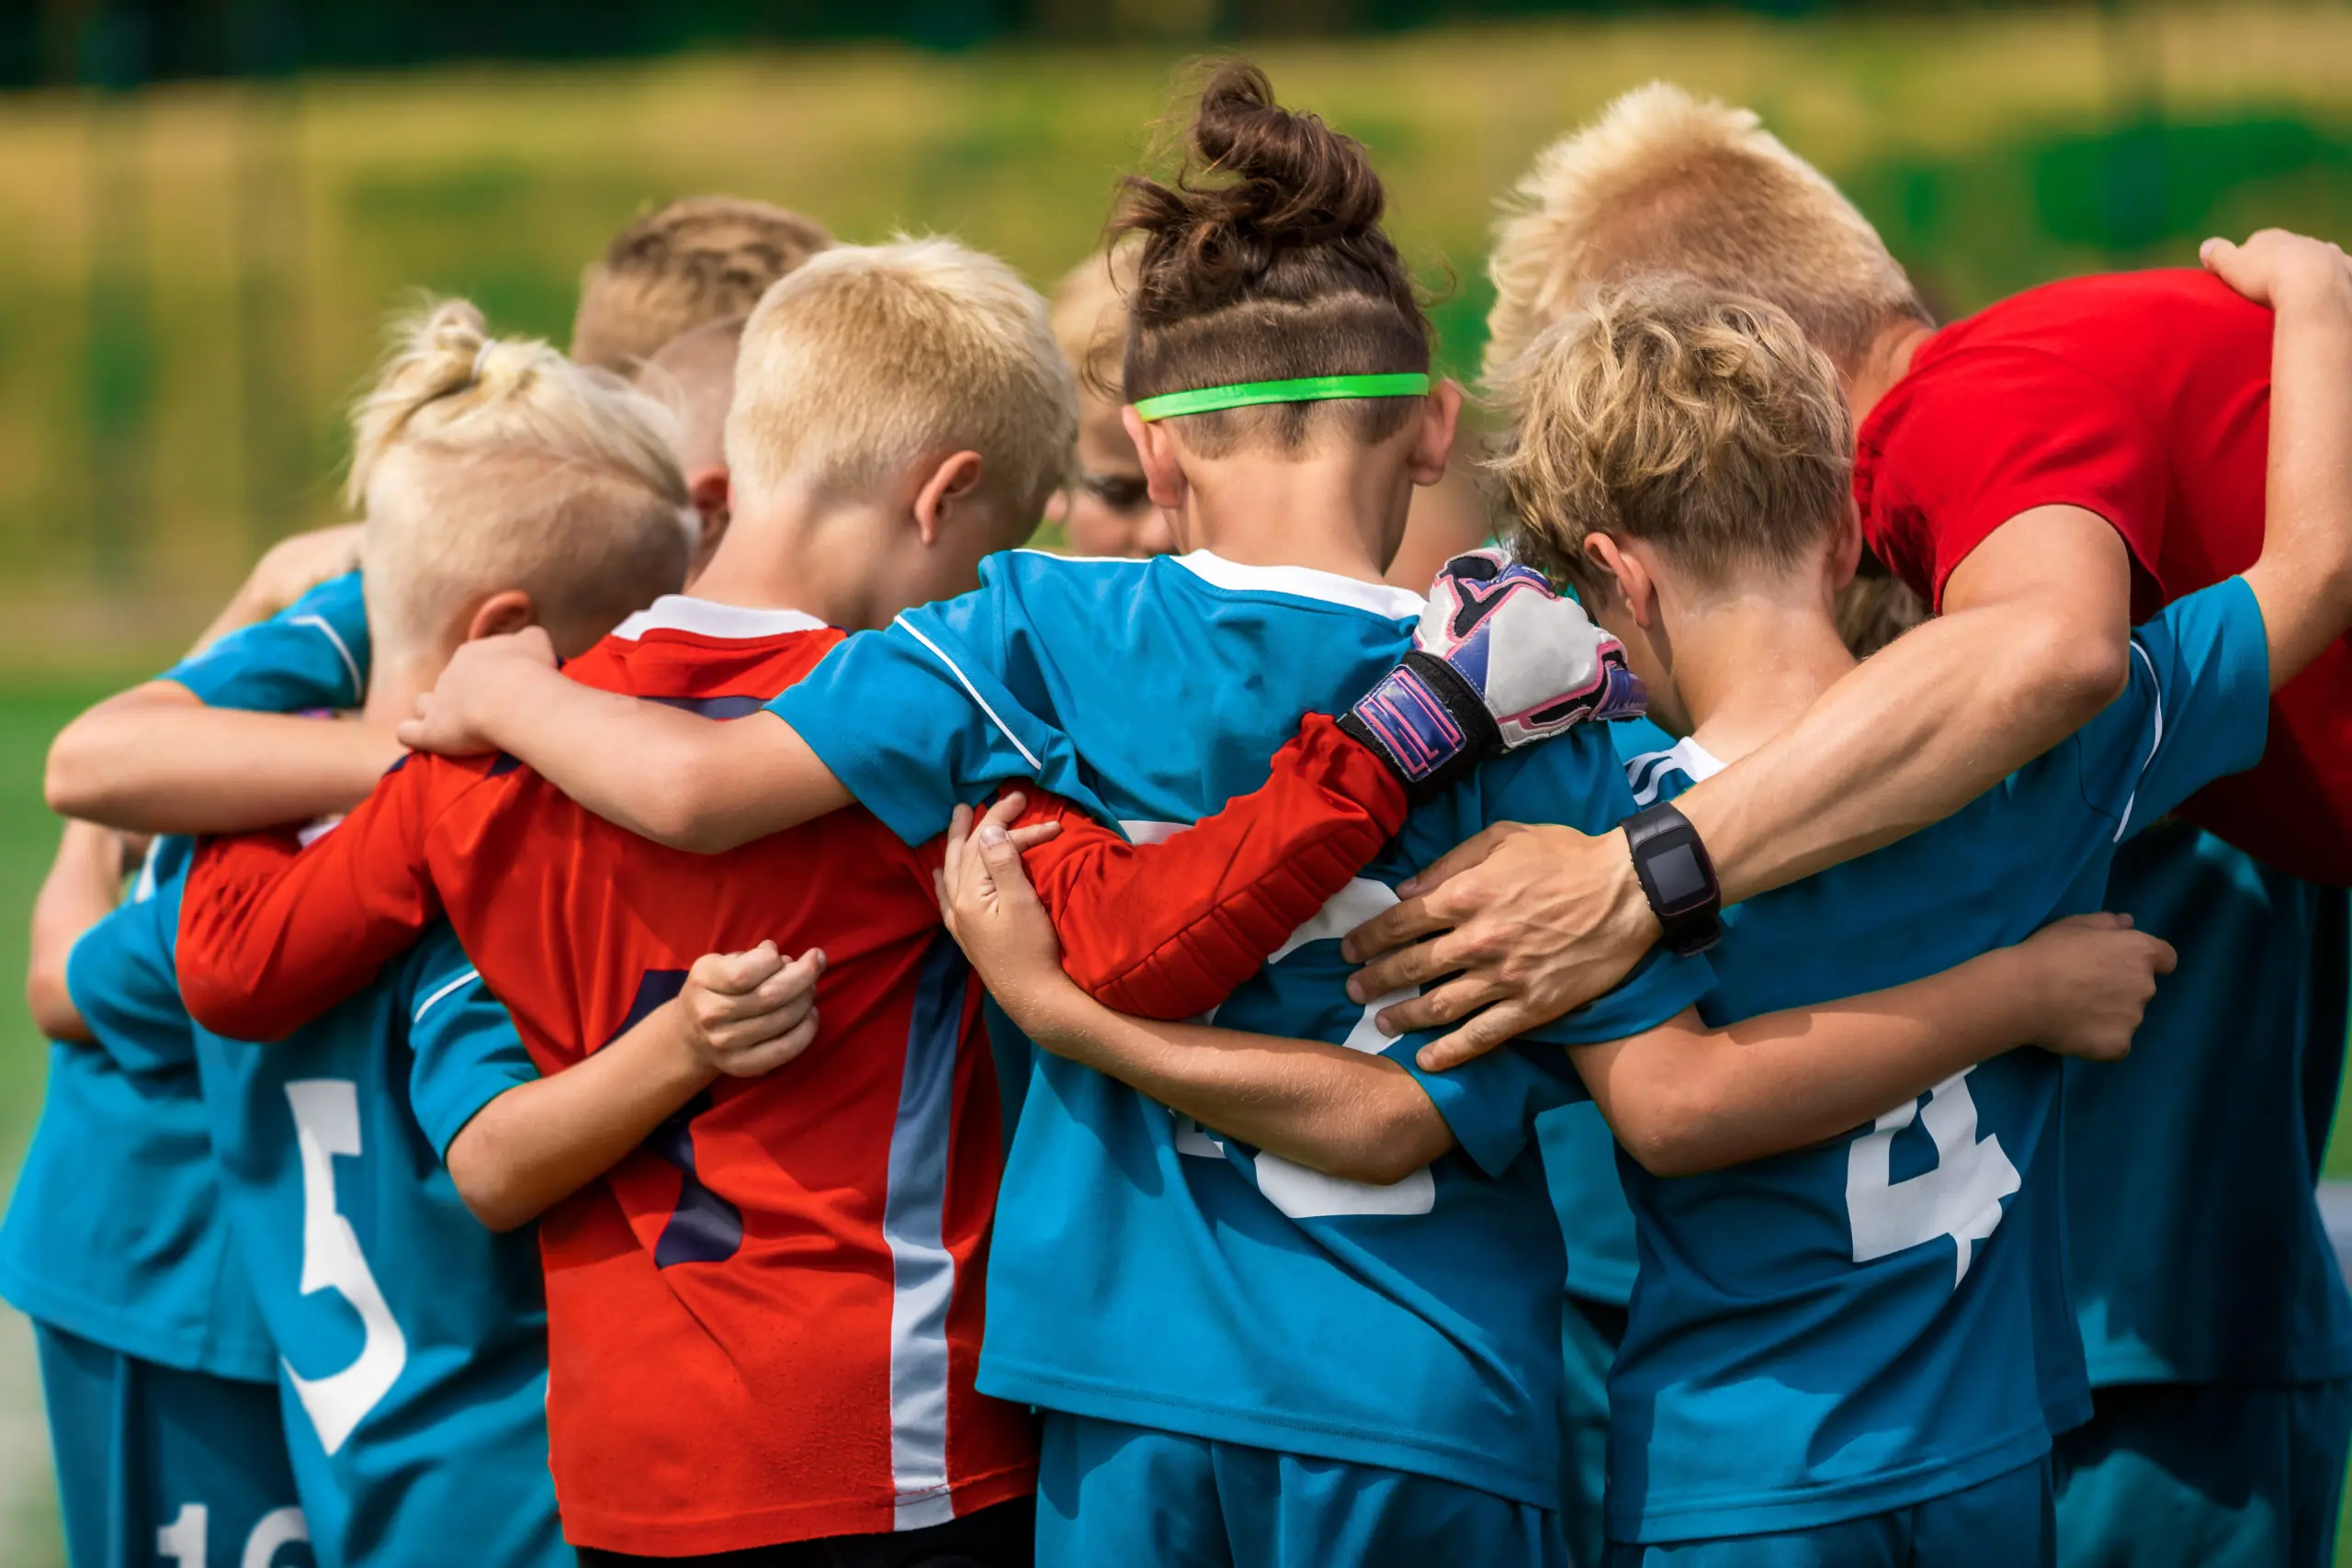 Featured image: 5 Lifelong Benefits of Youth Sports